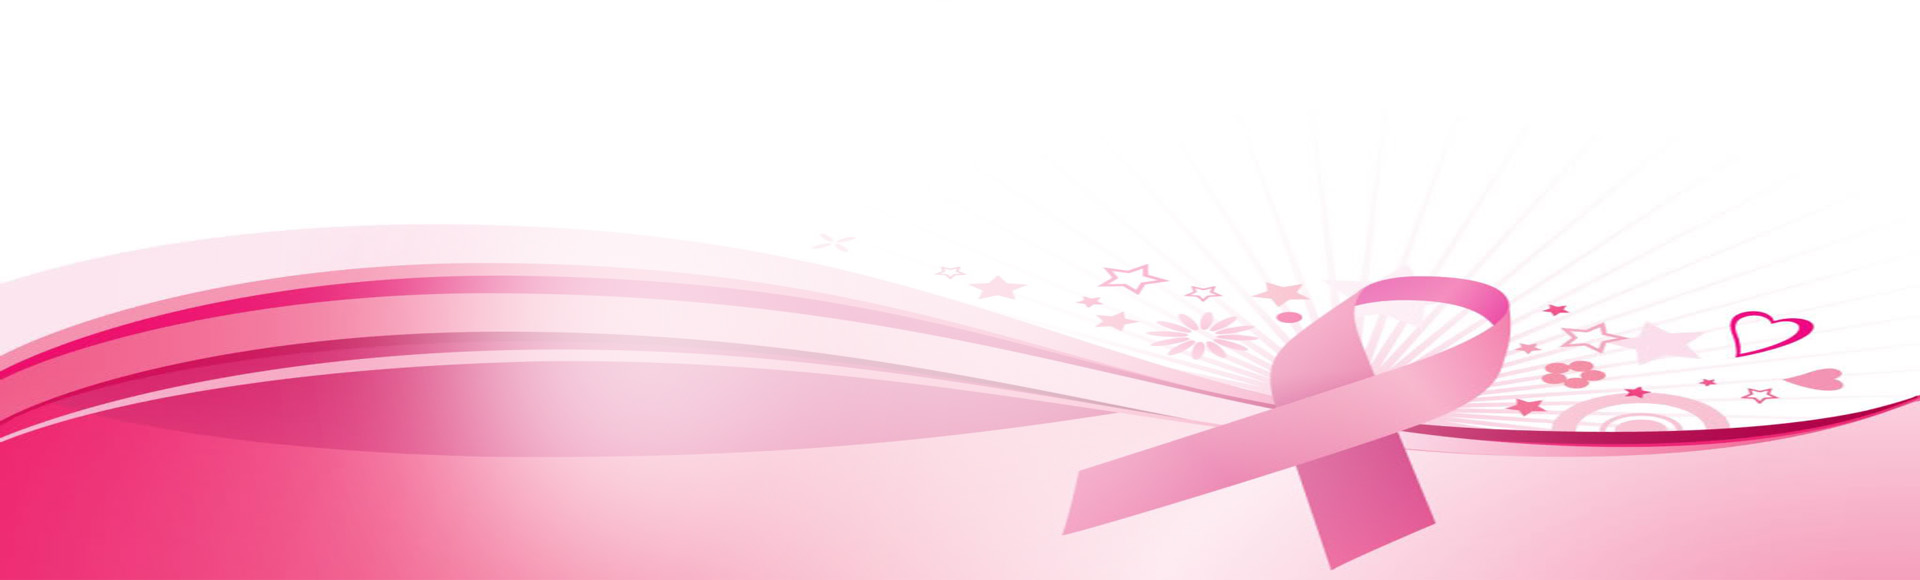 Pin Breast Cancer Fors Presentation Backgrounds for Powerpoint Inside Breast Cancer Powerpoint Template